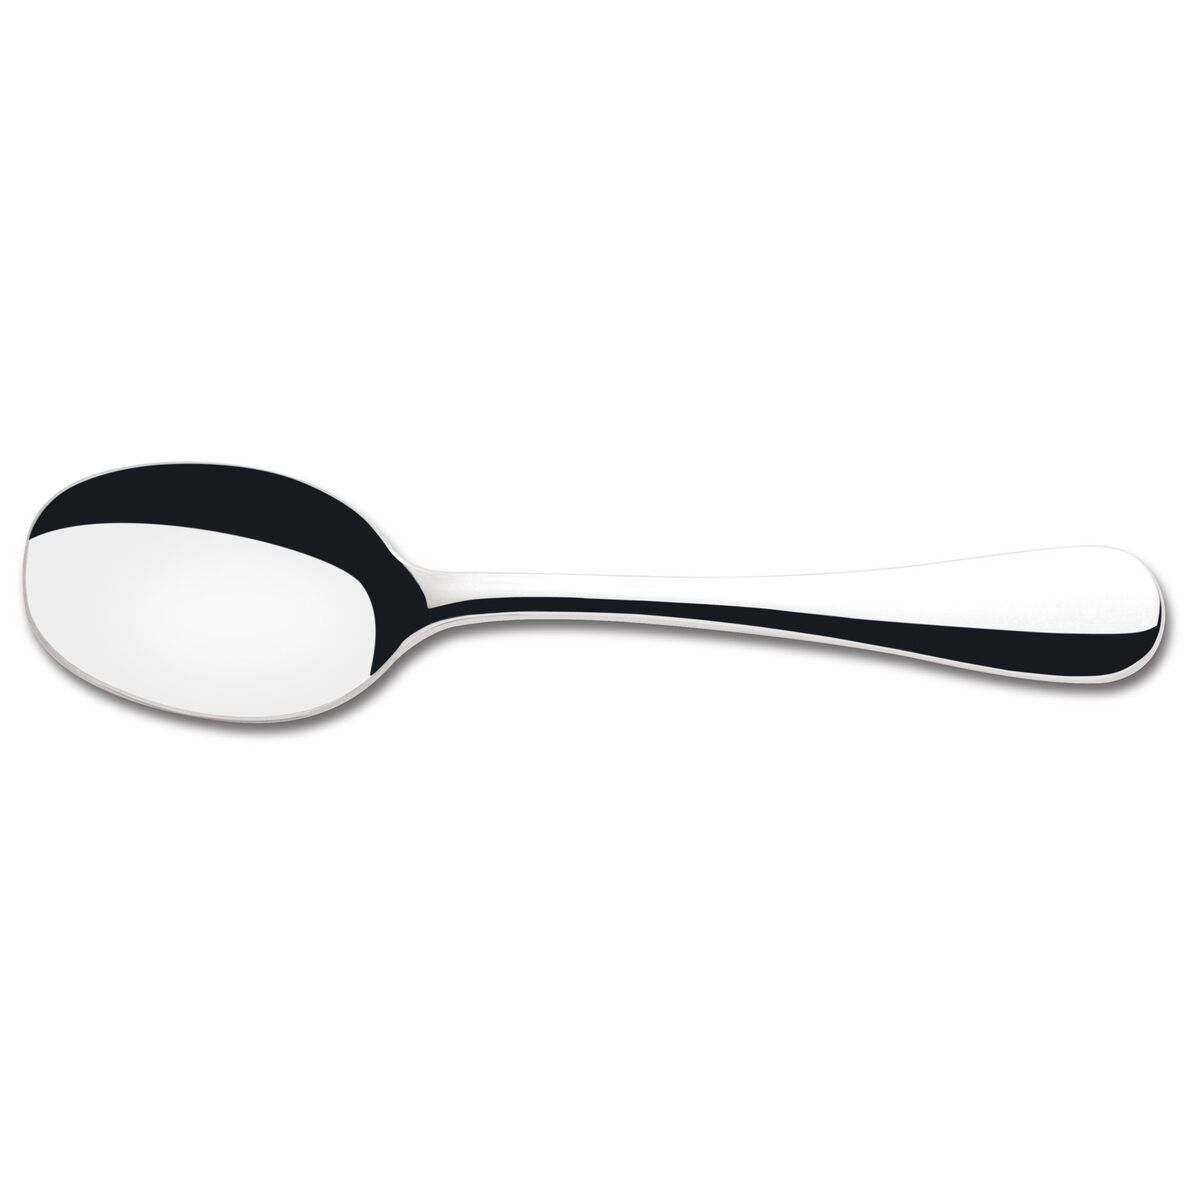 Tramontina Classic stainless steel soup spoon